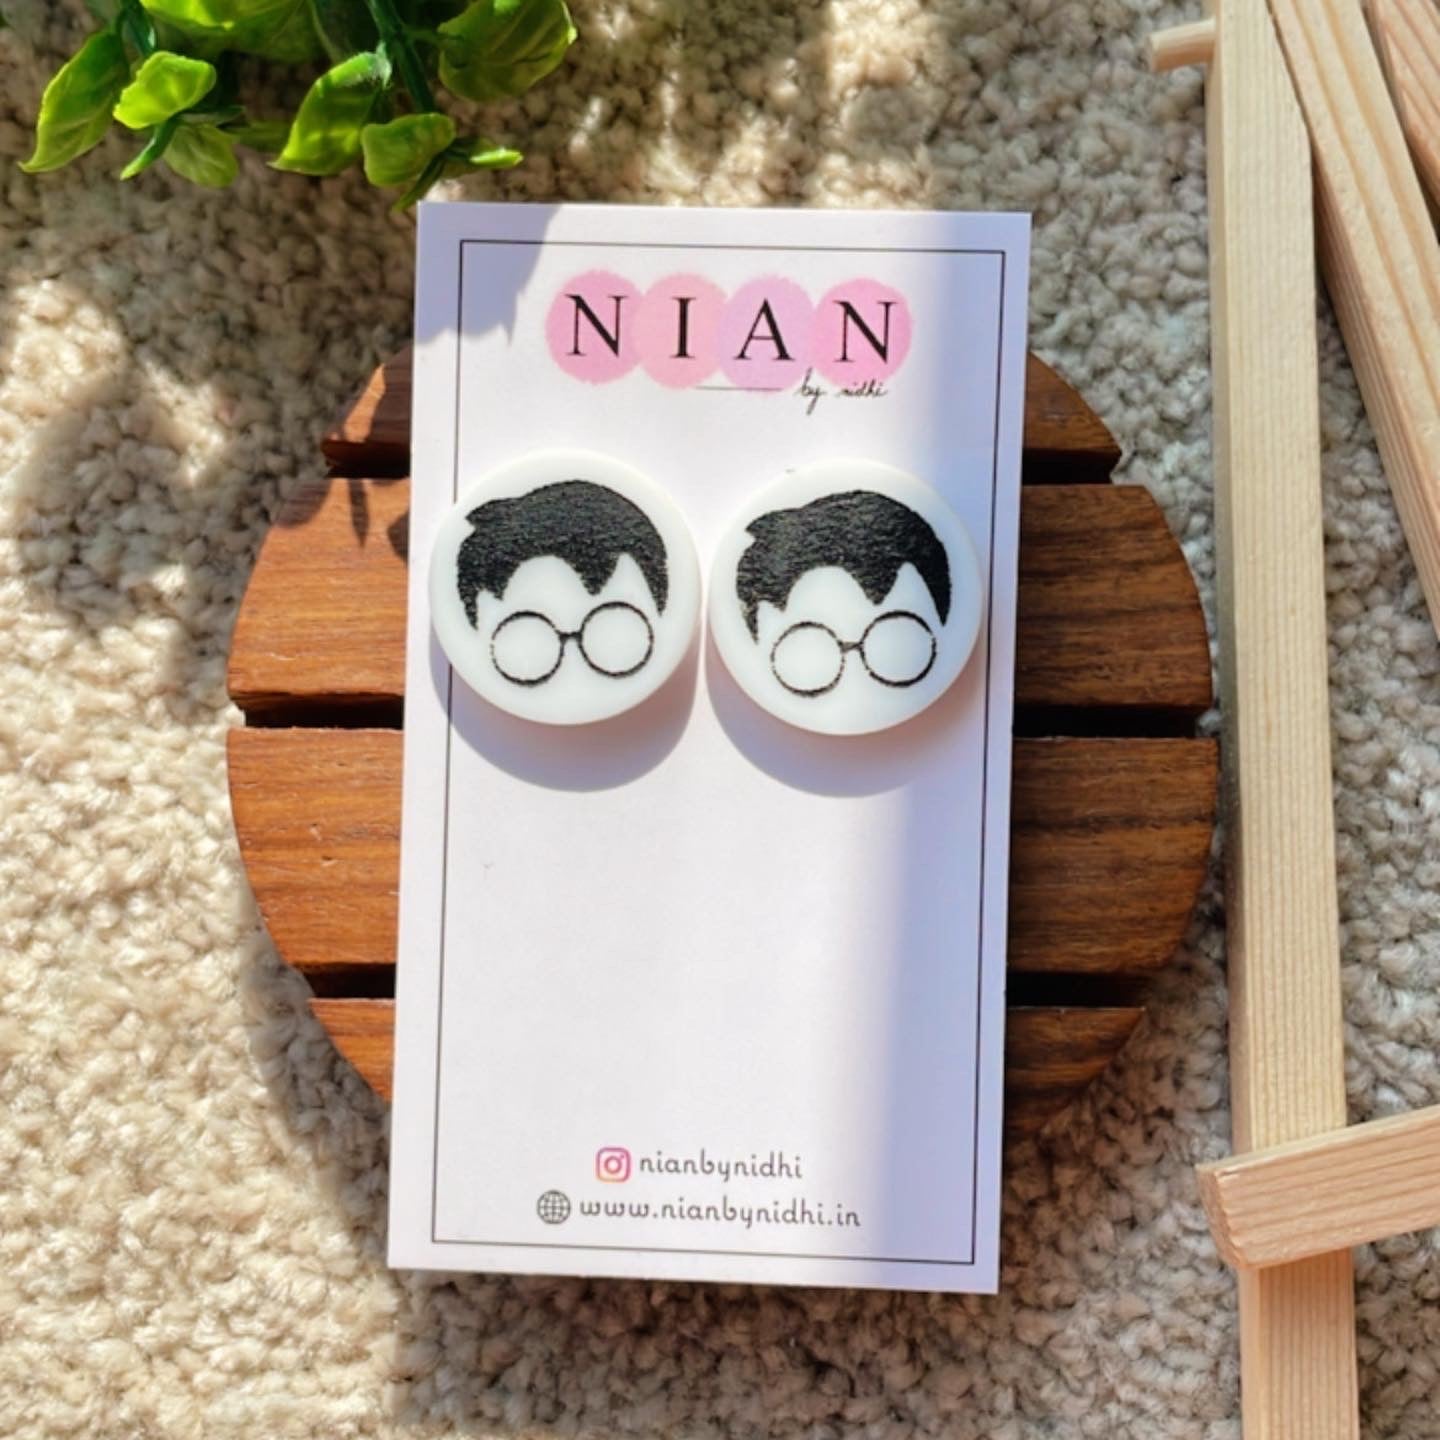 Harry Potter Face Studs - White and Black - Nian by Nidhi - placed on a Nian by Nidhi Earring card - in a light beige background